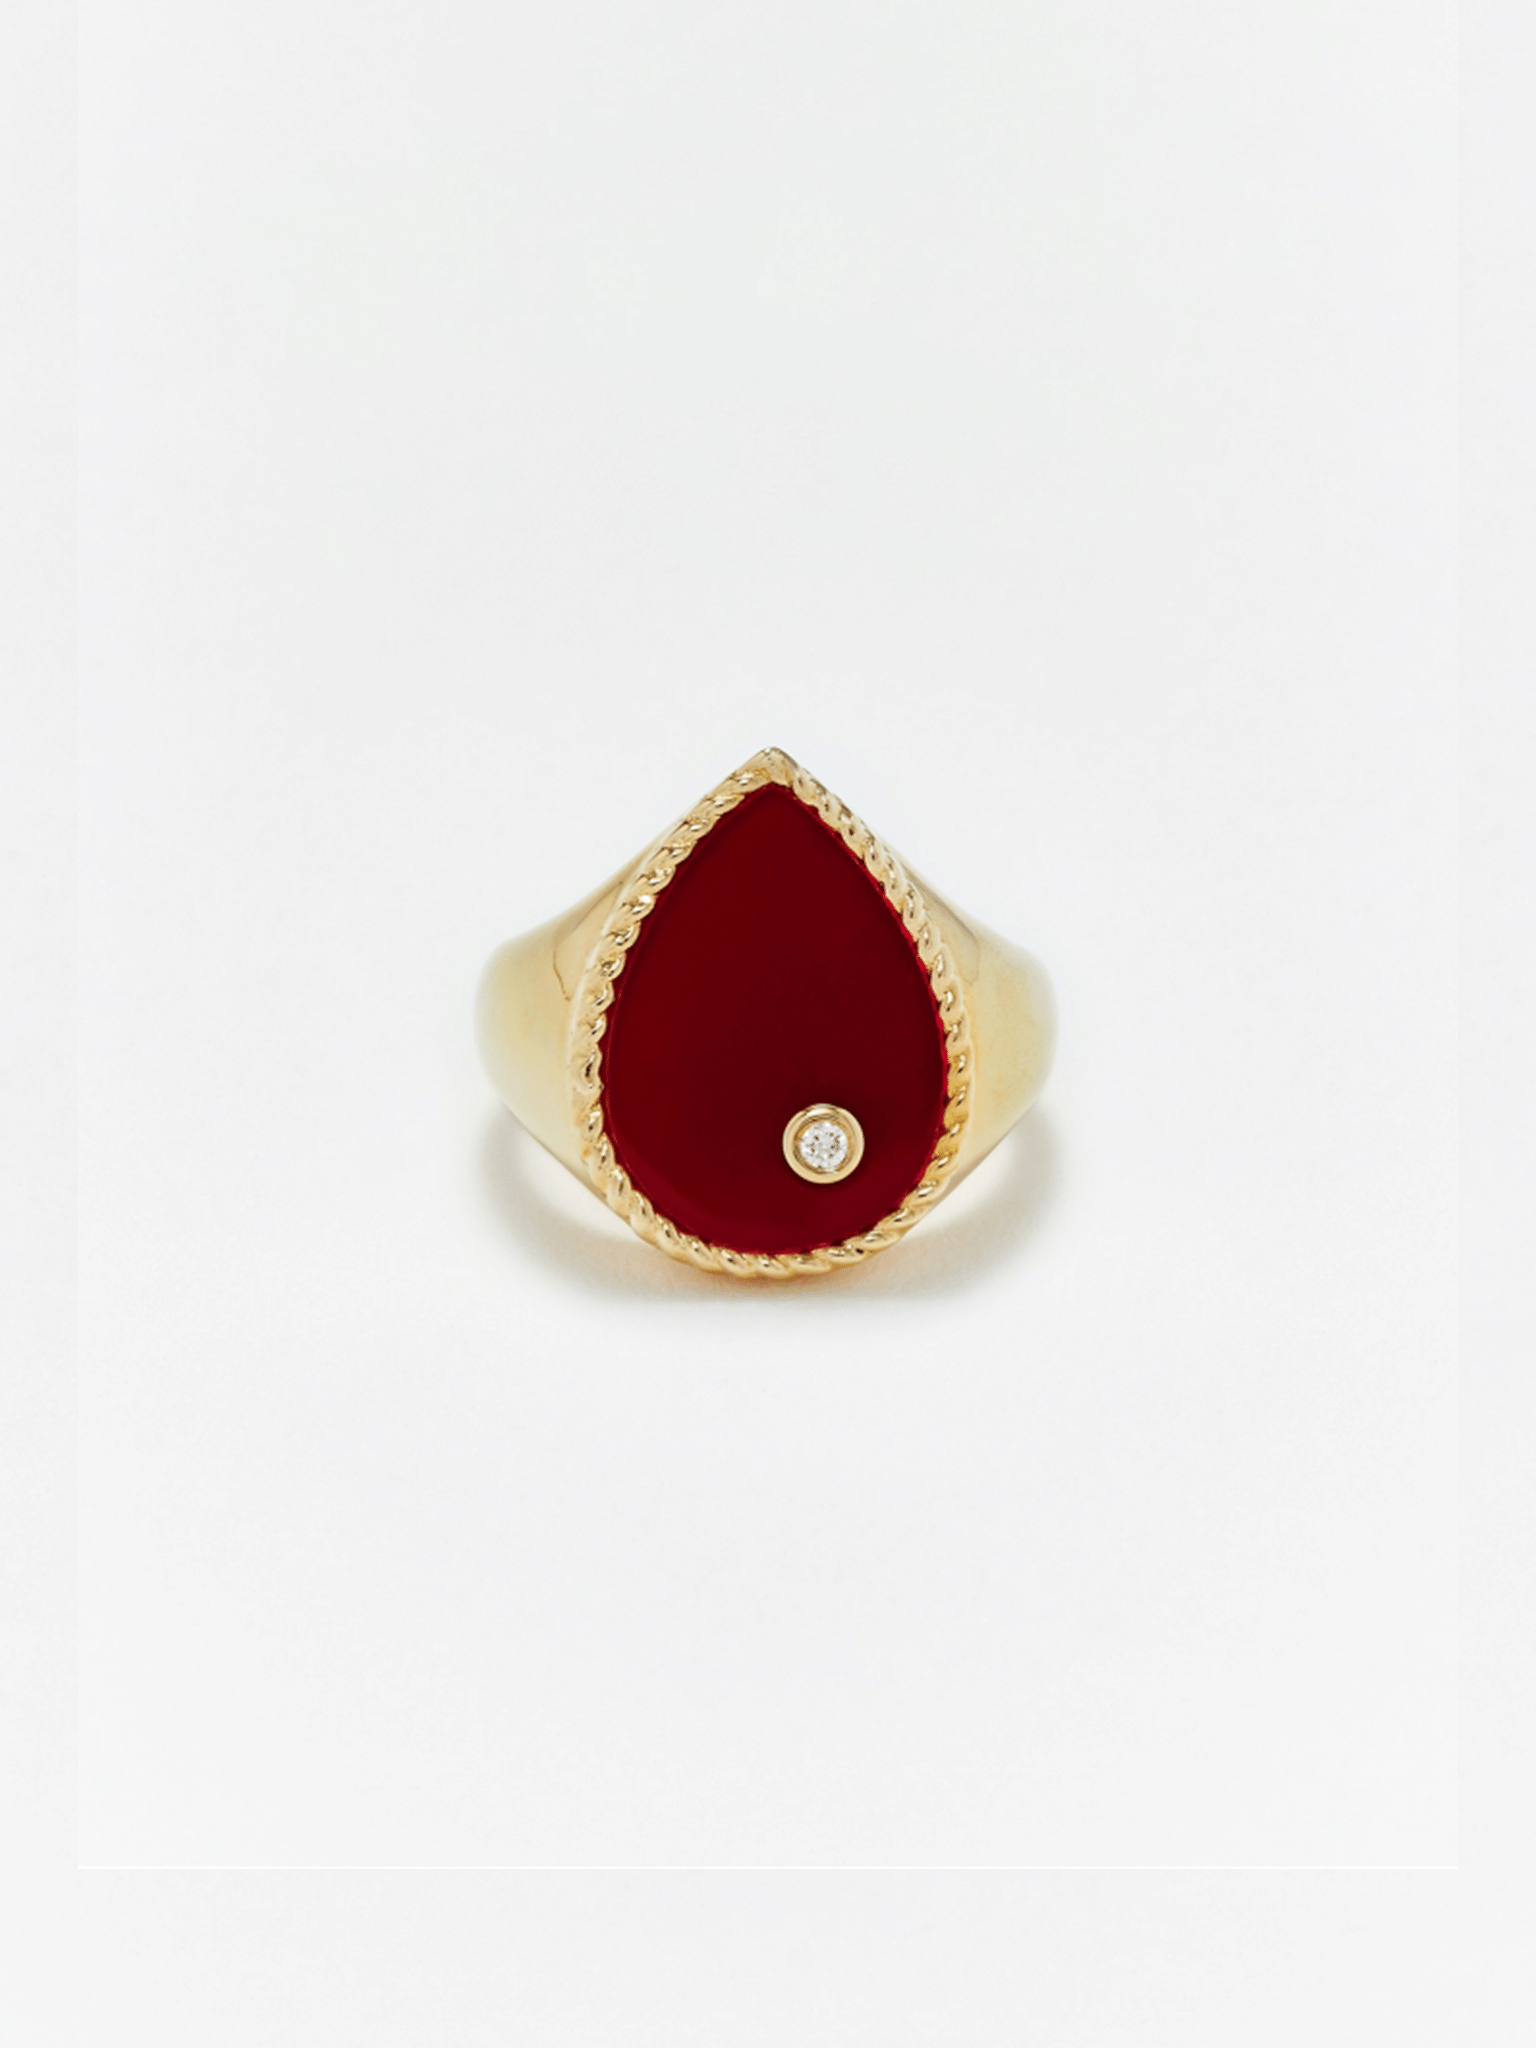 Diamond, agate and gold pear signet ring